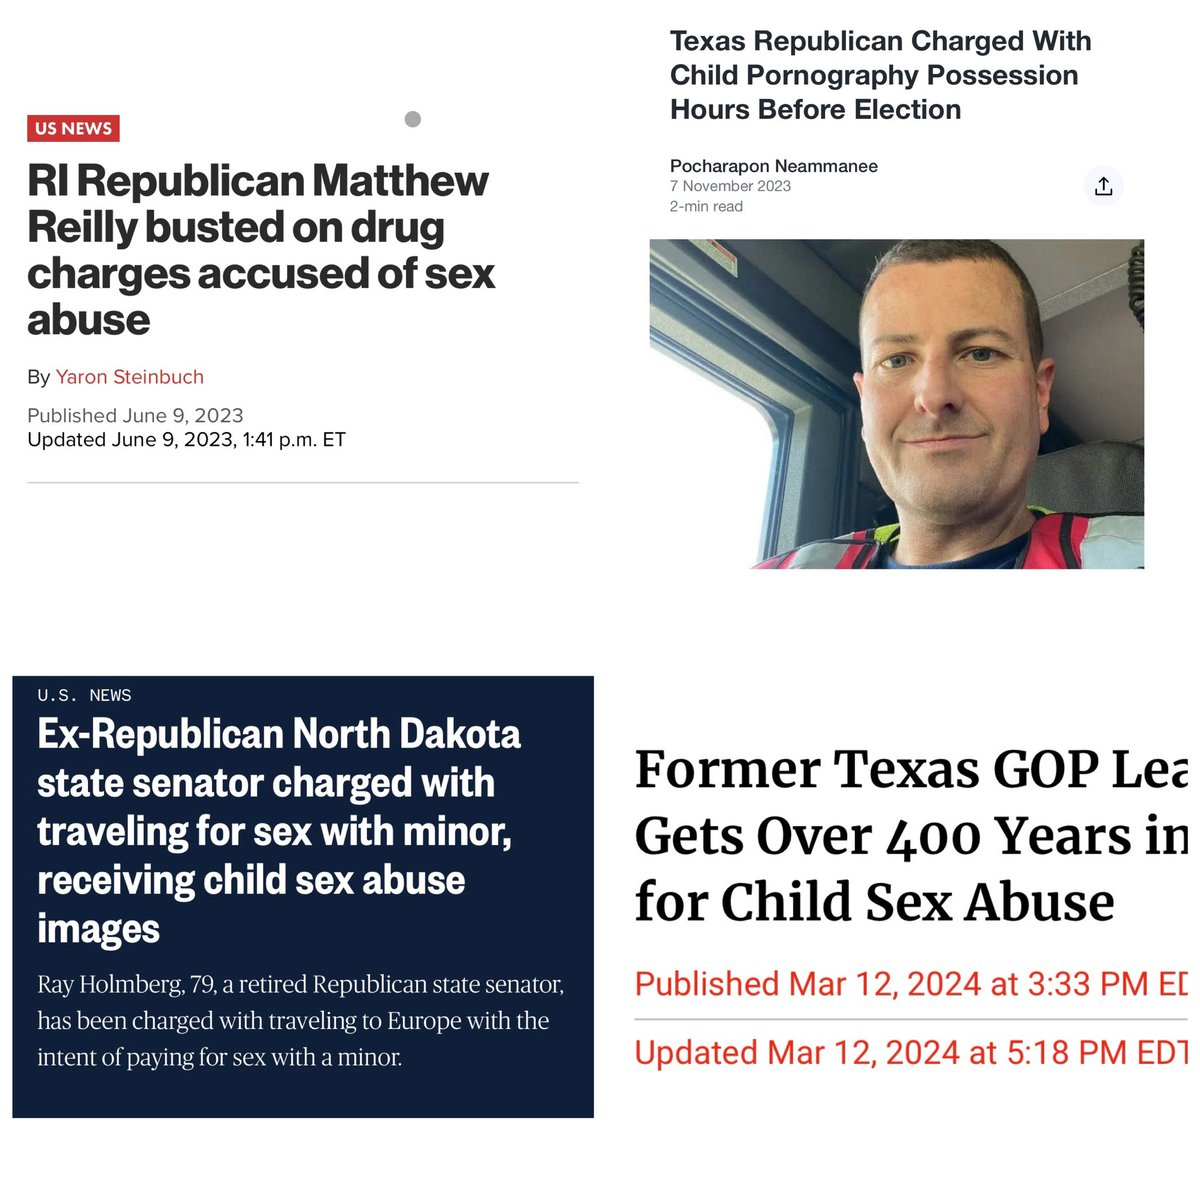 LOOK AT ALL THESE PEDOS. THE GOP IS THE REAL PARTY OF PEDOS. RETWEET 😱 IF YOU’RE A REPUBLICAN, YOU CLEARLY SUPPORT PEDOPHILIA DISGUSTING. YOUR CHILDREN ARE NOT SAFE AROUND ANY REPUBLICANS.